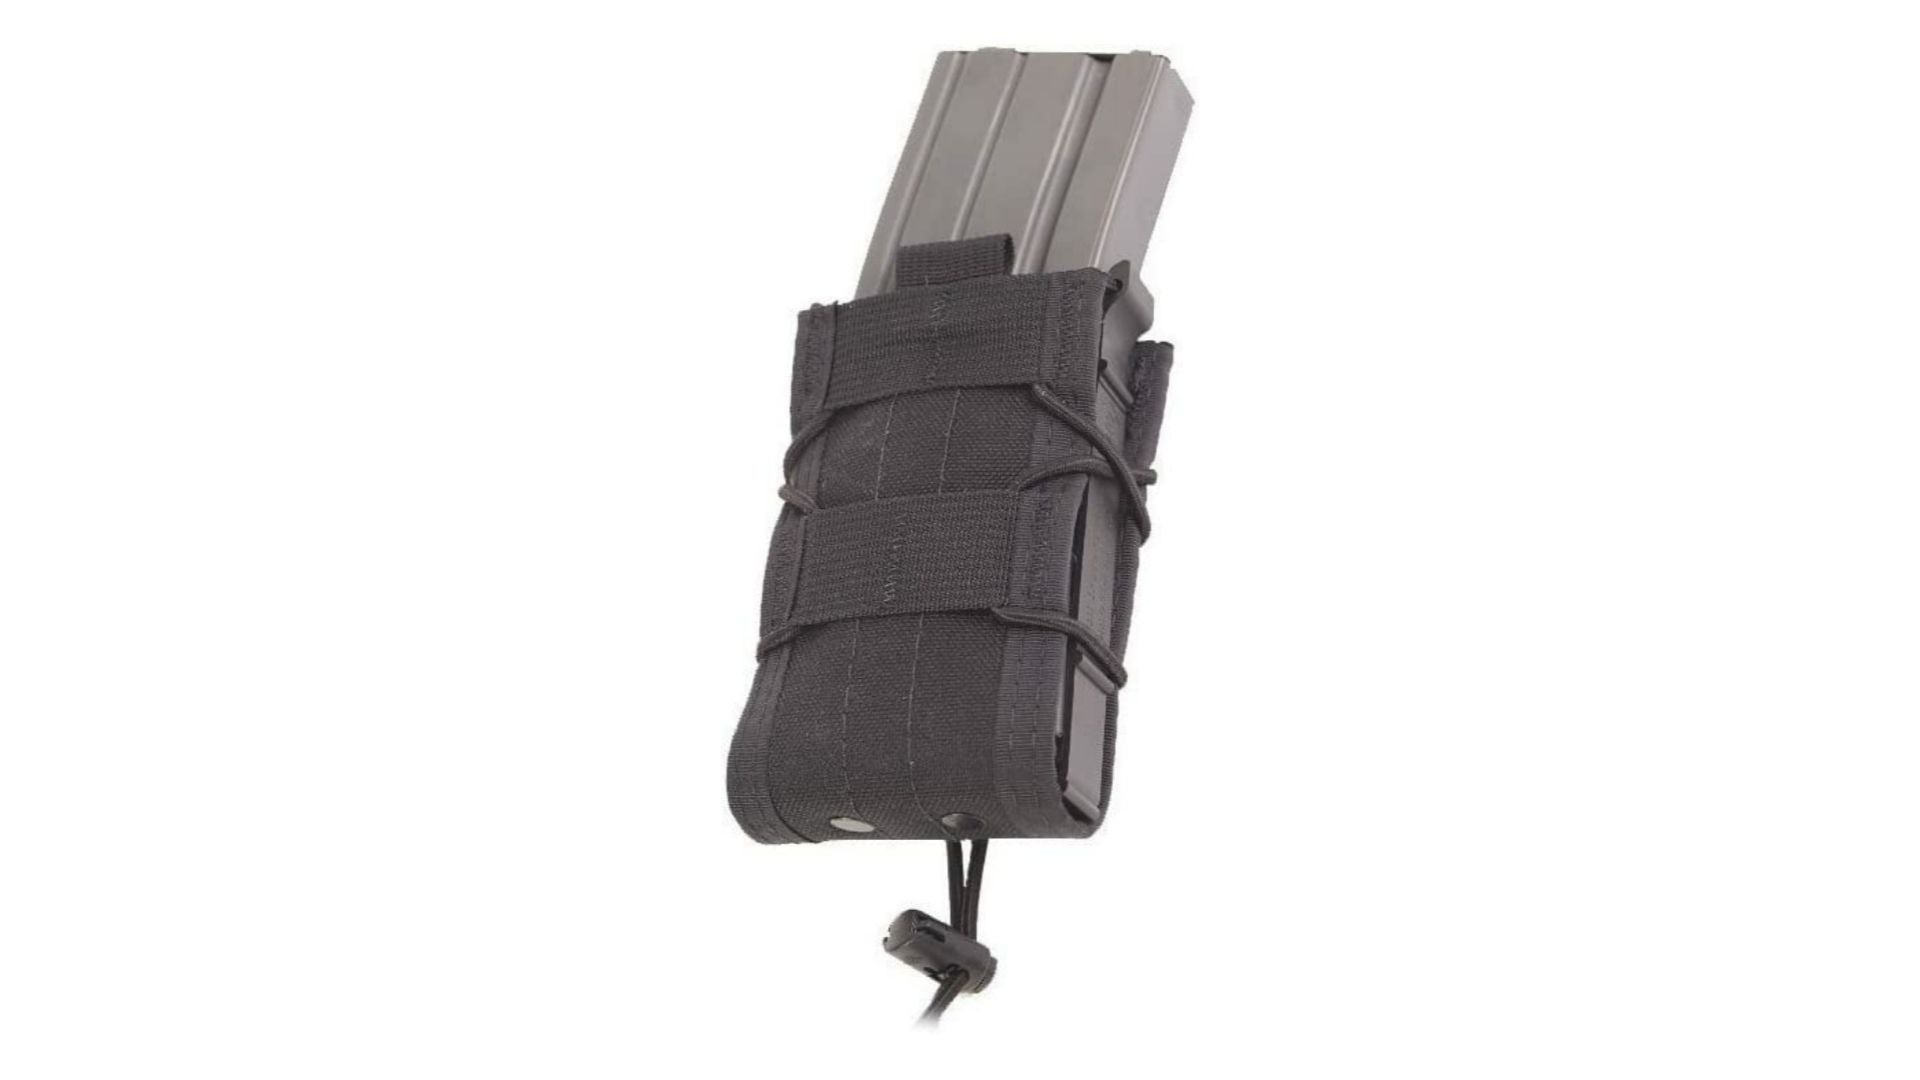 single black color by Patriot Performance, US Army modular Pistol Mag Pouch